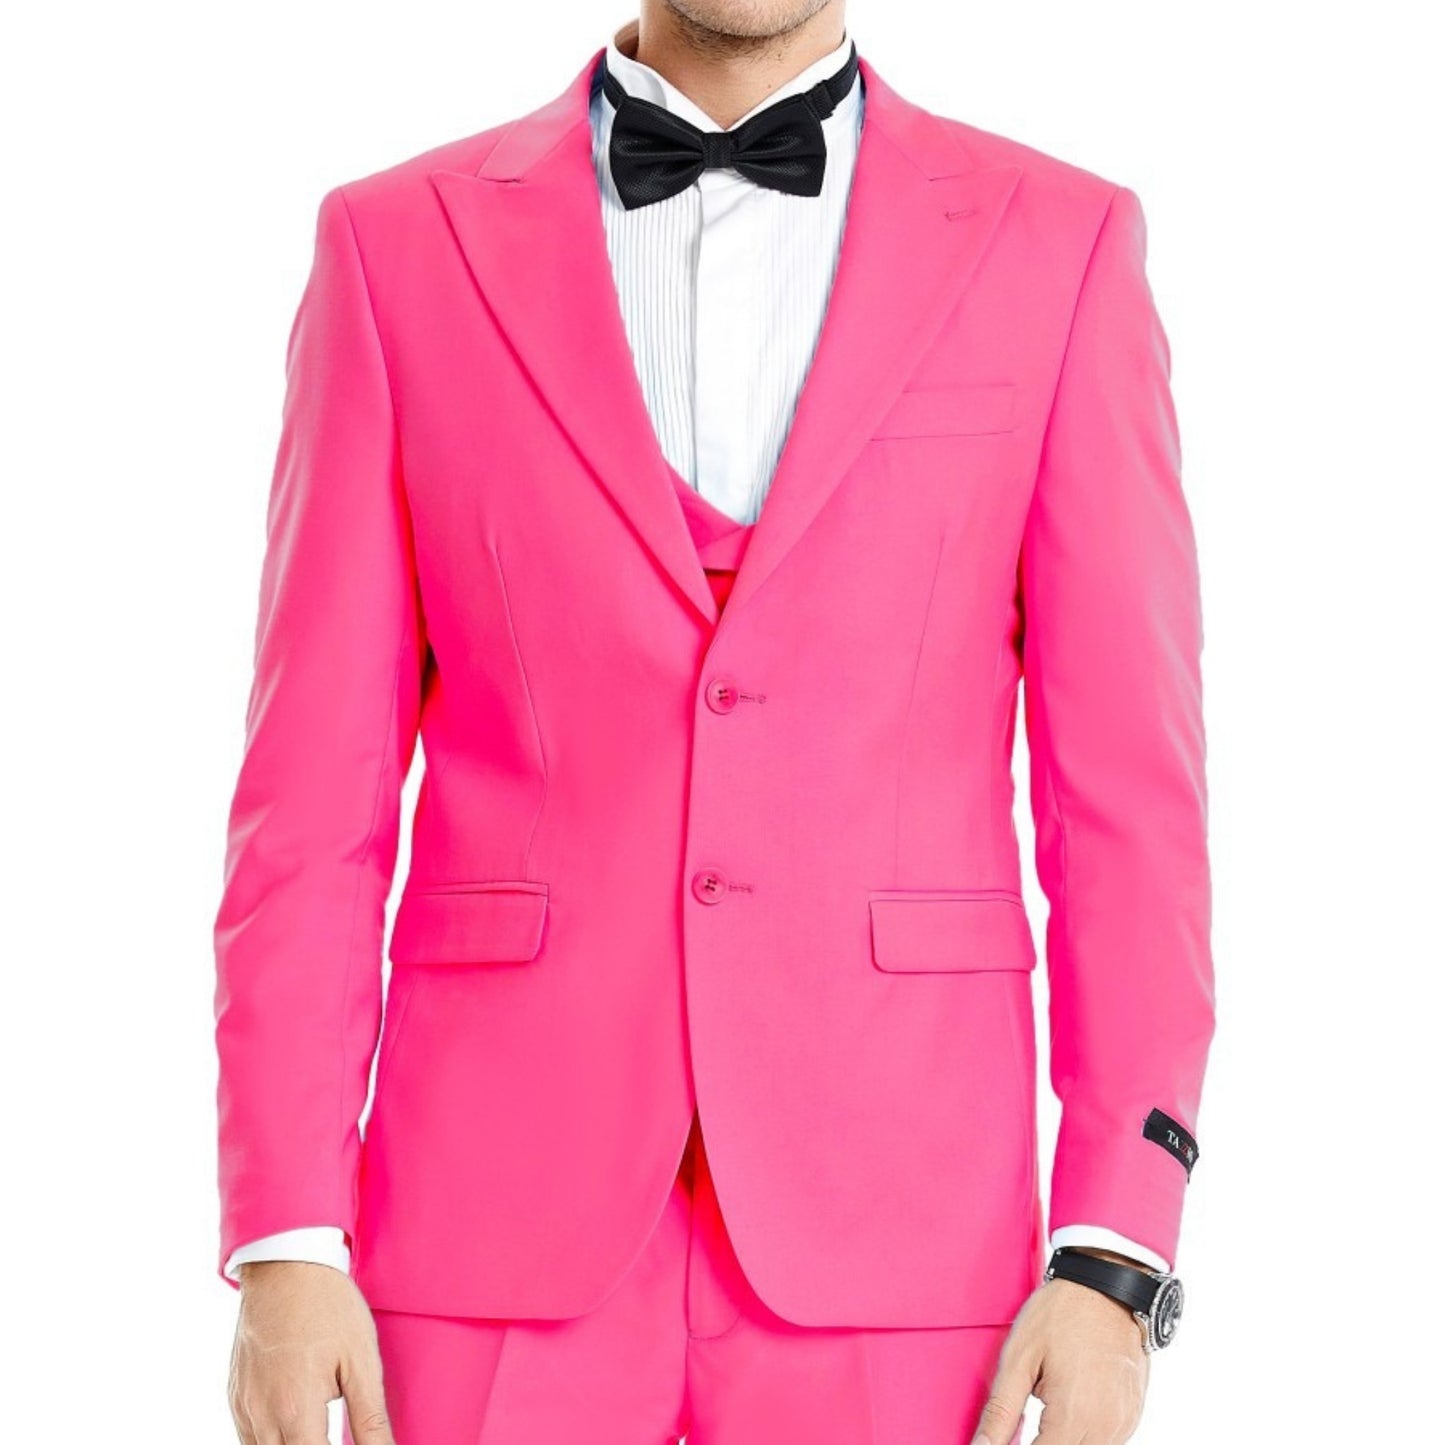 Dashing man in a full electric pink suit, the perfect prom ensemble.